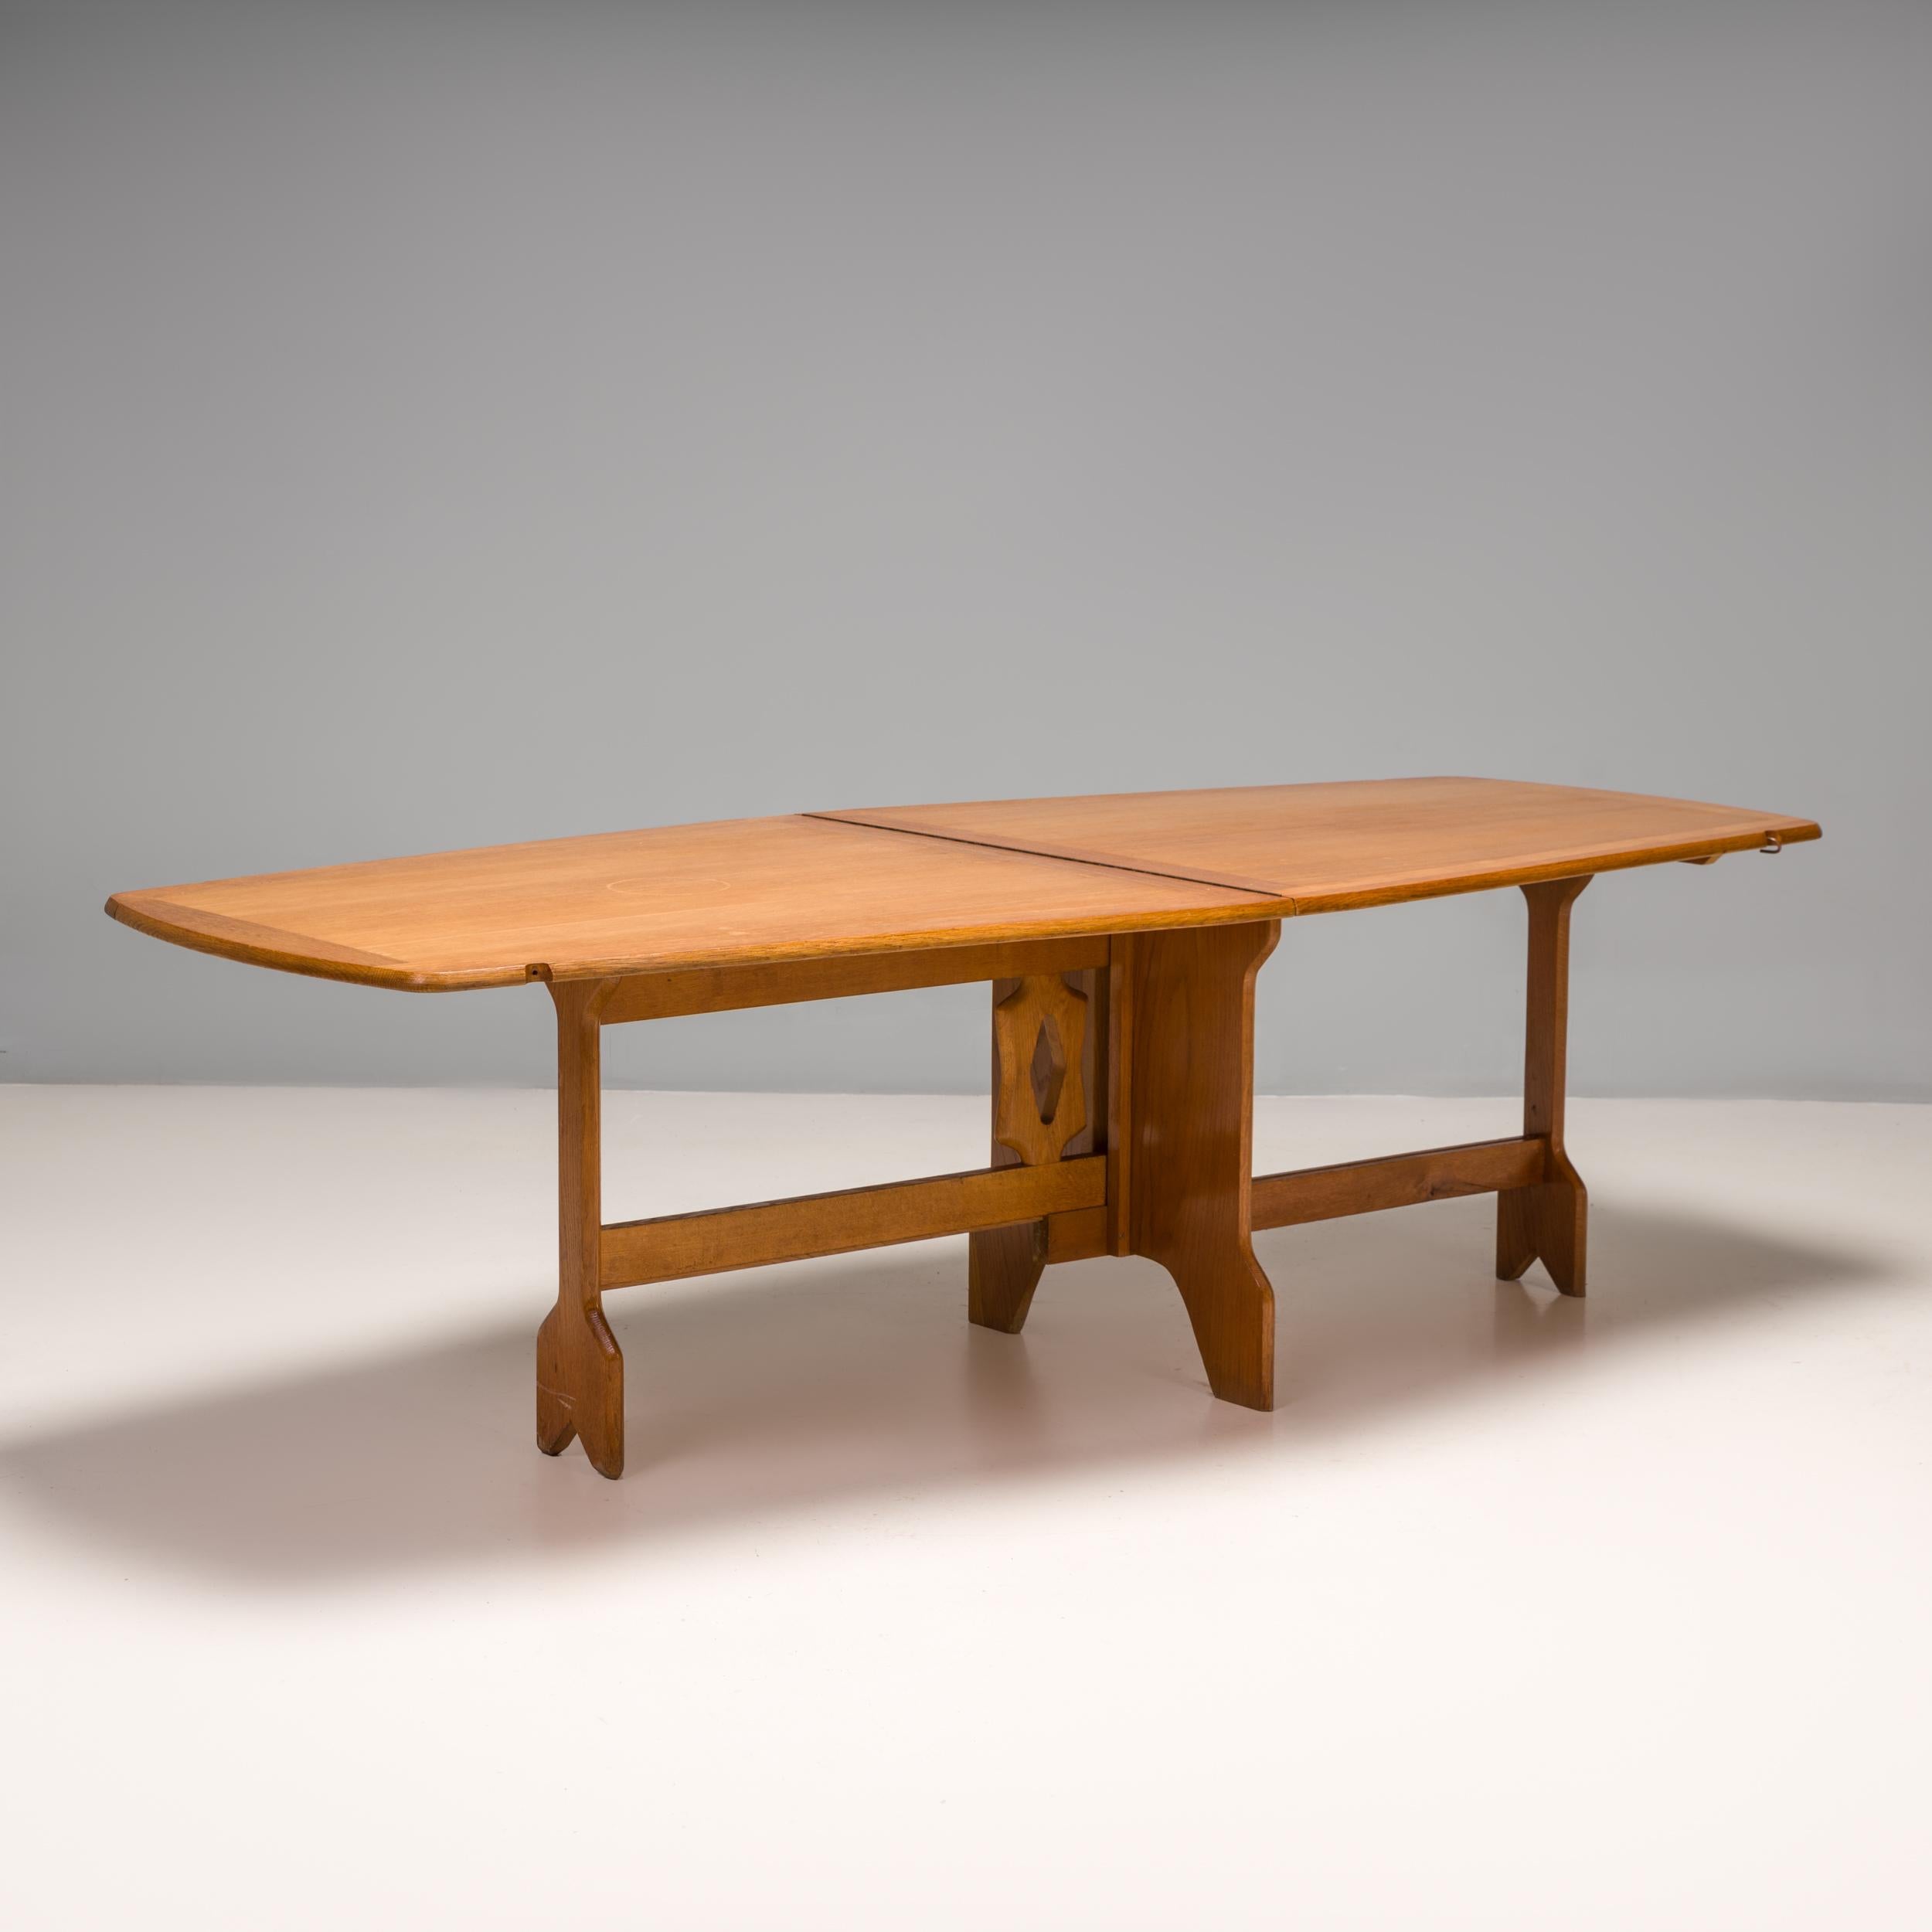 Designed by Robert Guillerme and Jacques Chambron, this folding dining table is a fantastic example of the pair’s sculptural design style in post war France.

Constructed from solid oak, the table has a slightly angled shape and is hinged down the